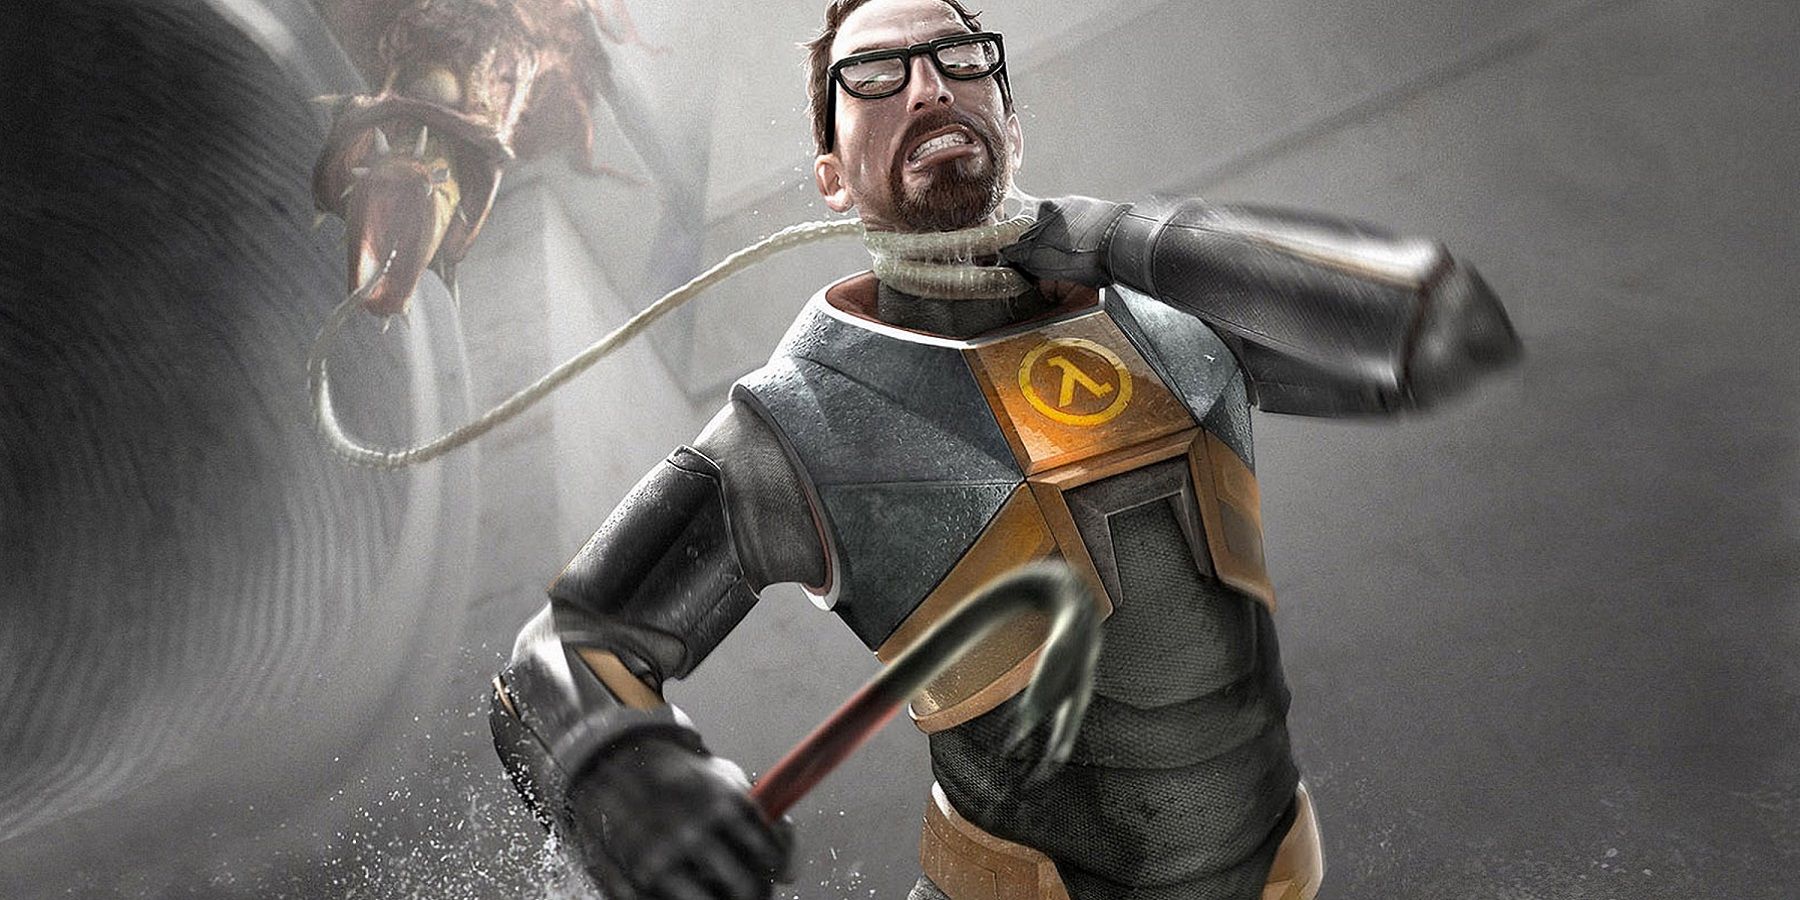 Image from Half-Life 2 showing Gordon Freeman getting strangled by a barnacle.